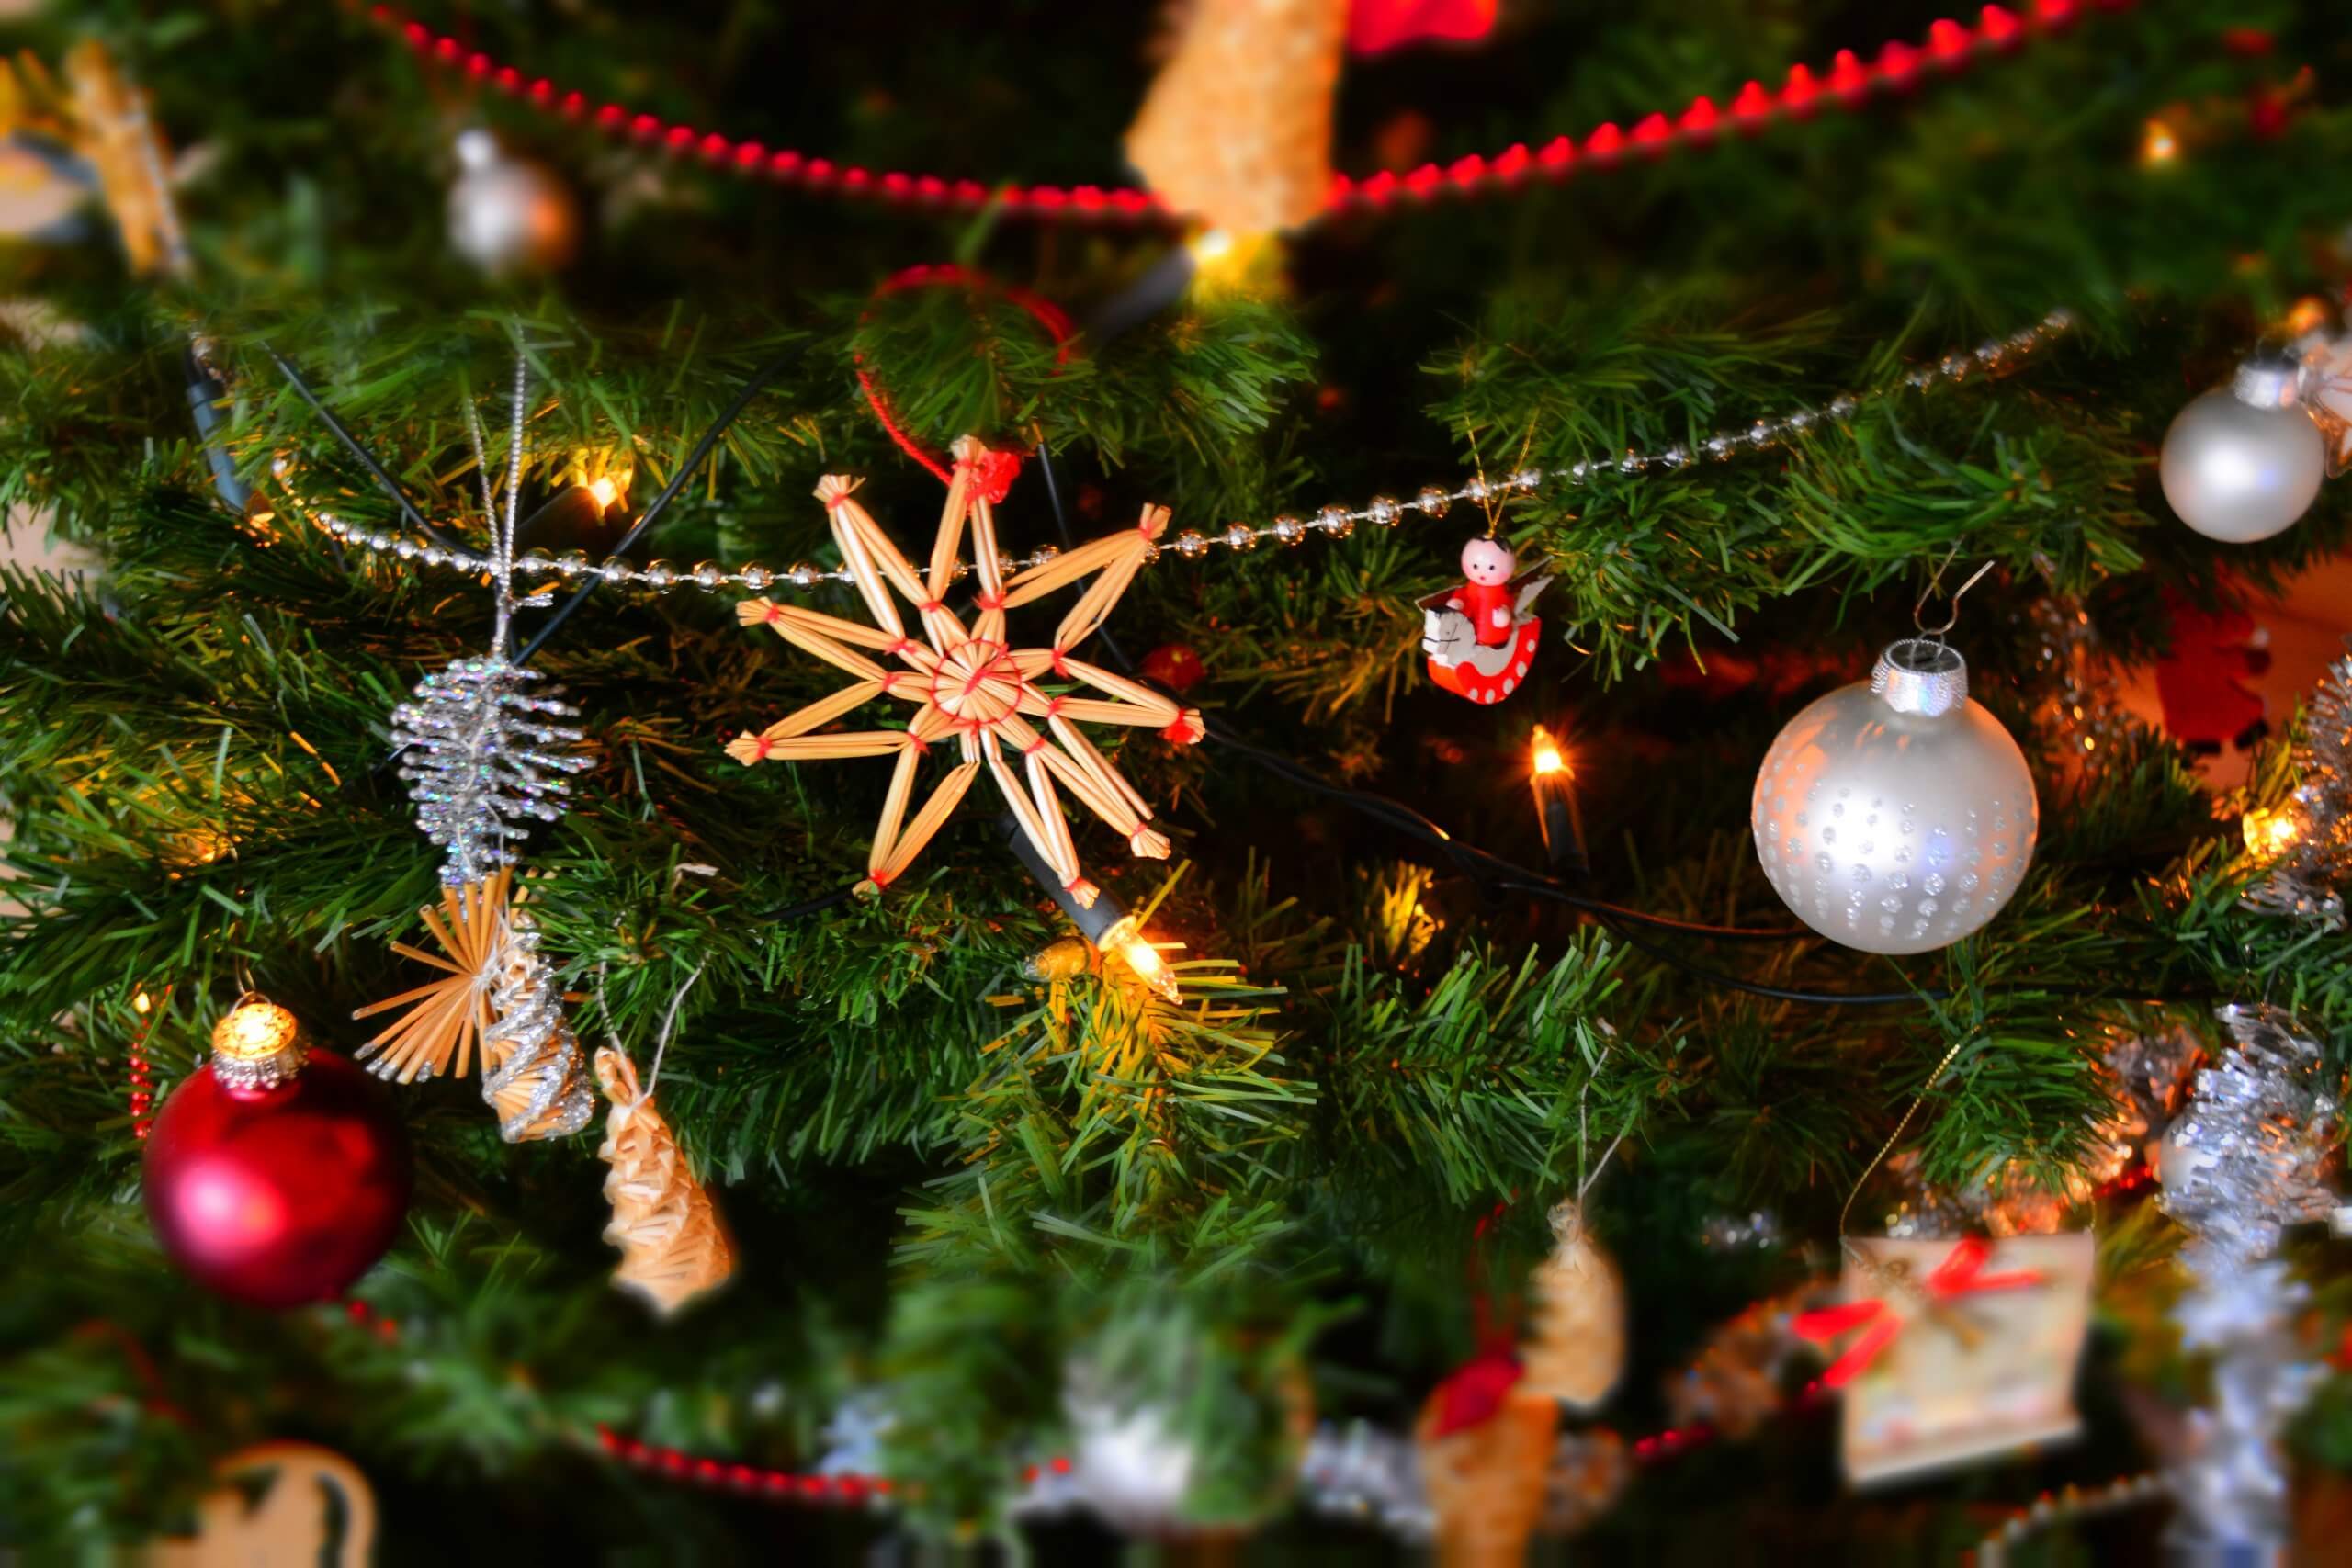 Which are the Most Popular Christmas Trees?